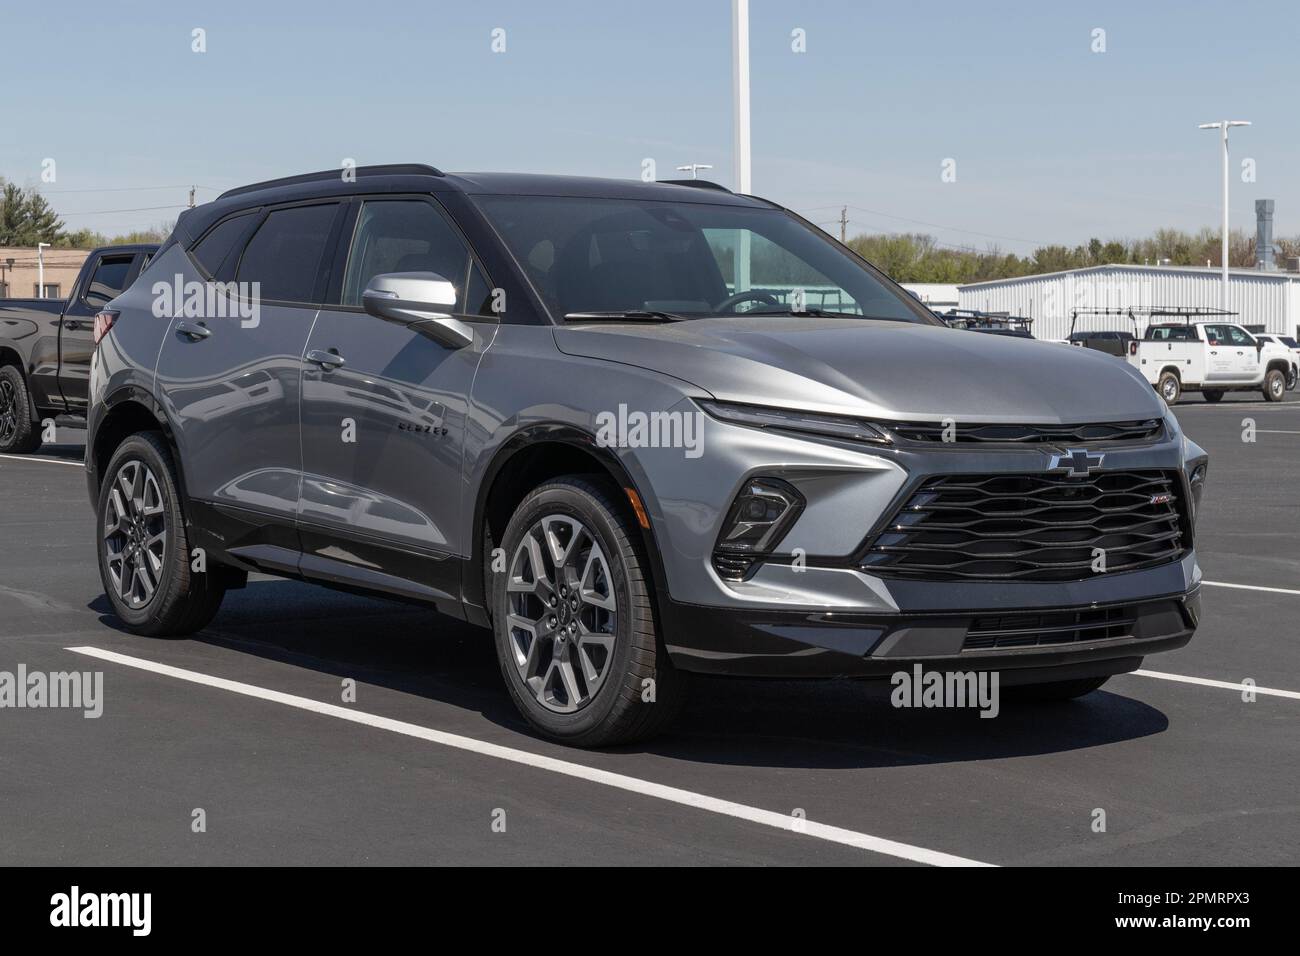 Indianapolis - Circa April 2023: Chevrolet Blazer display at a dealership. Chevy offers the Blazer in 2LT, 3LT and RS models. Stock Photo